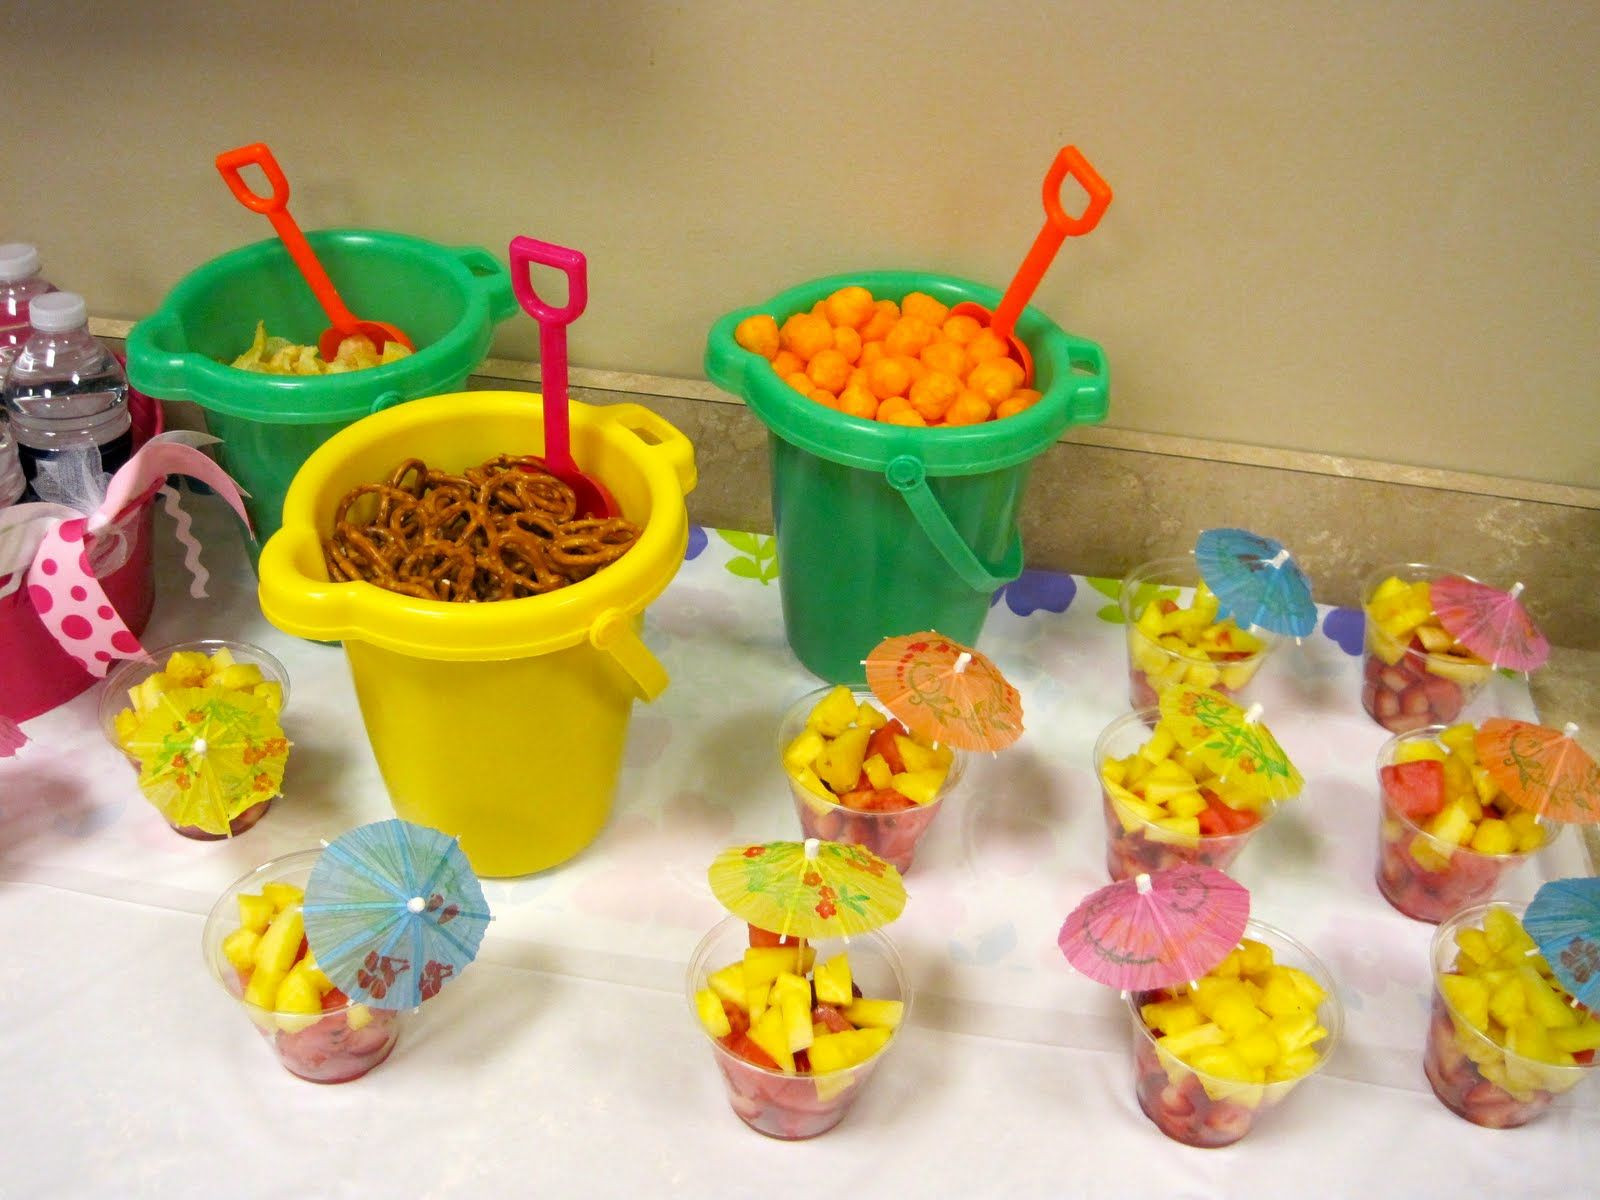 Beach Party Ideas For Kindergarten
 Cute for a beach party at the end of the school year